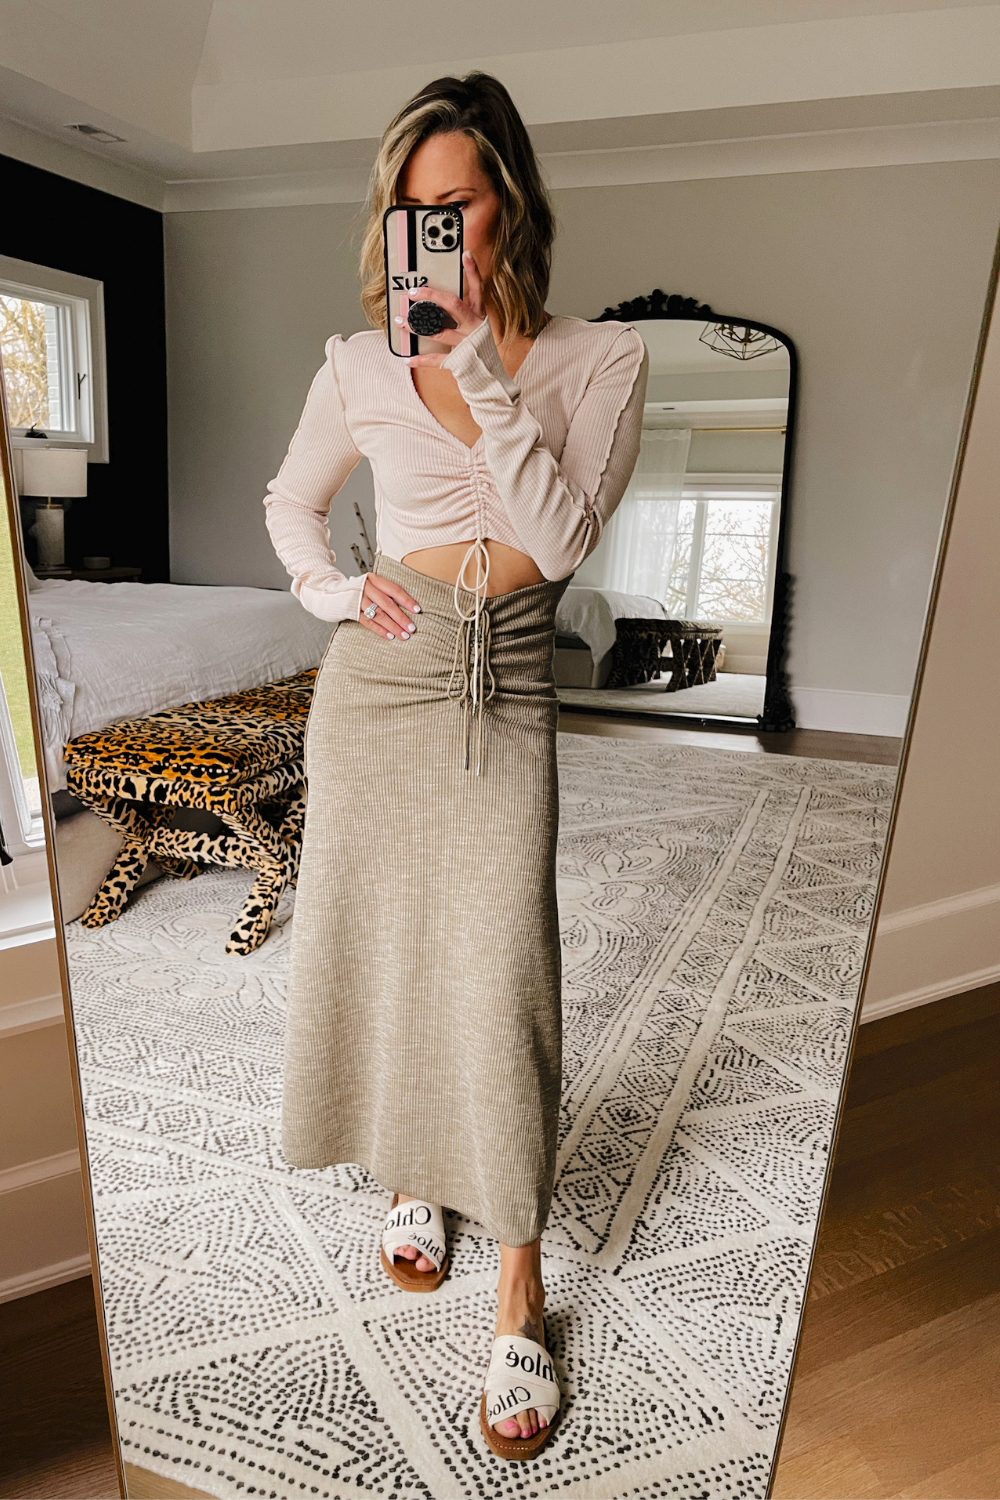 Suzanne taking a mirror selfie wearing a midi dress with cut outs and Chloe sandals. 